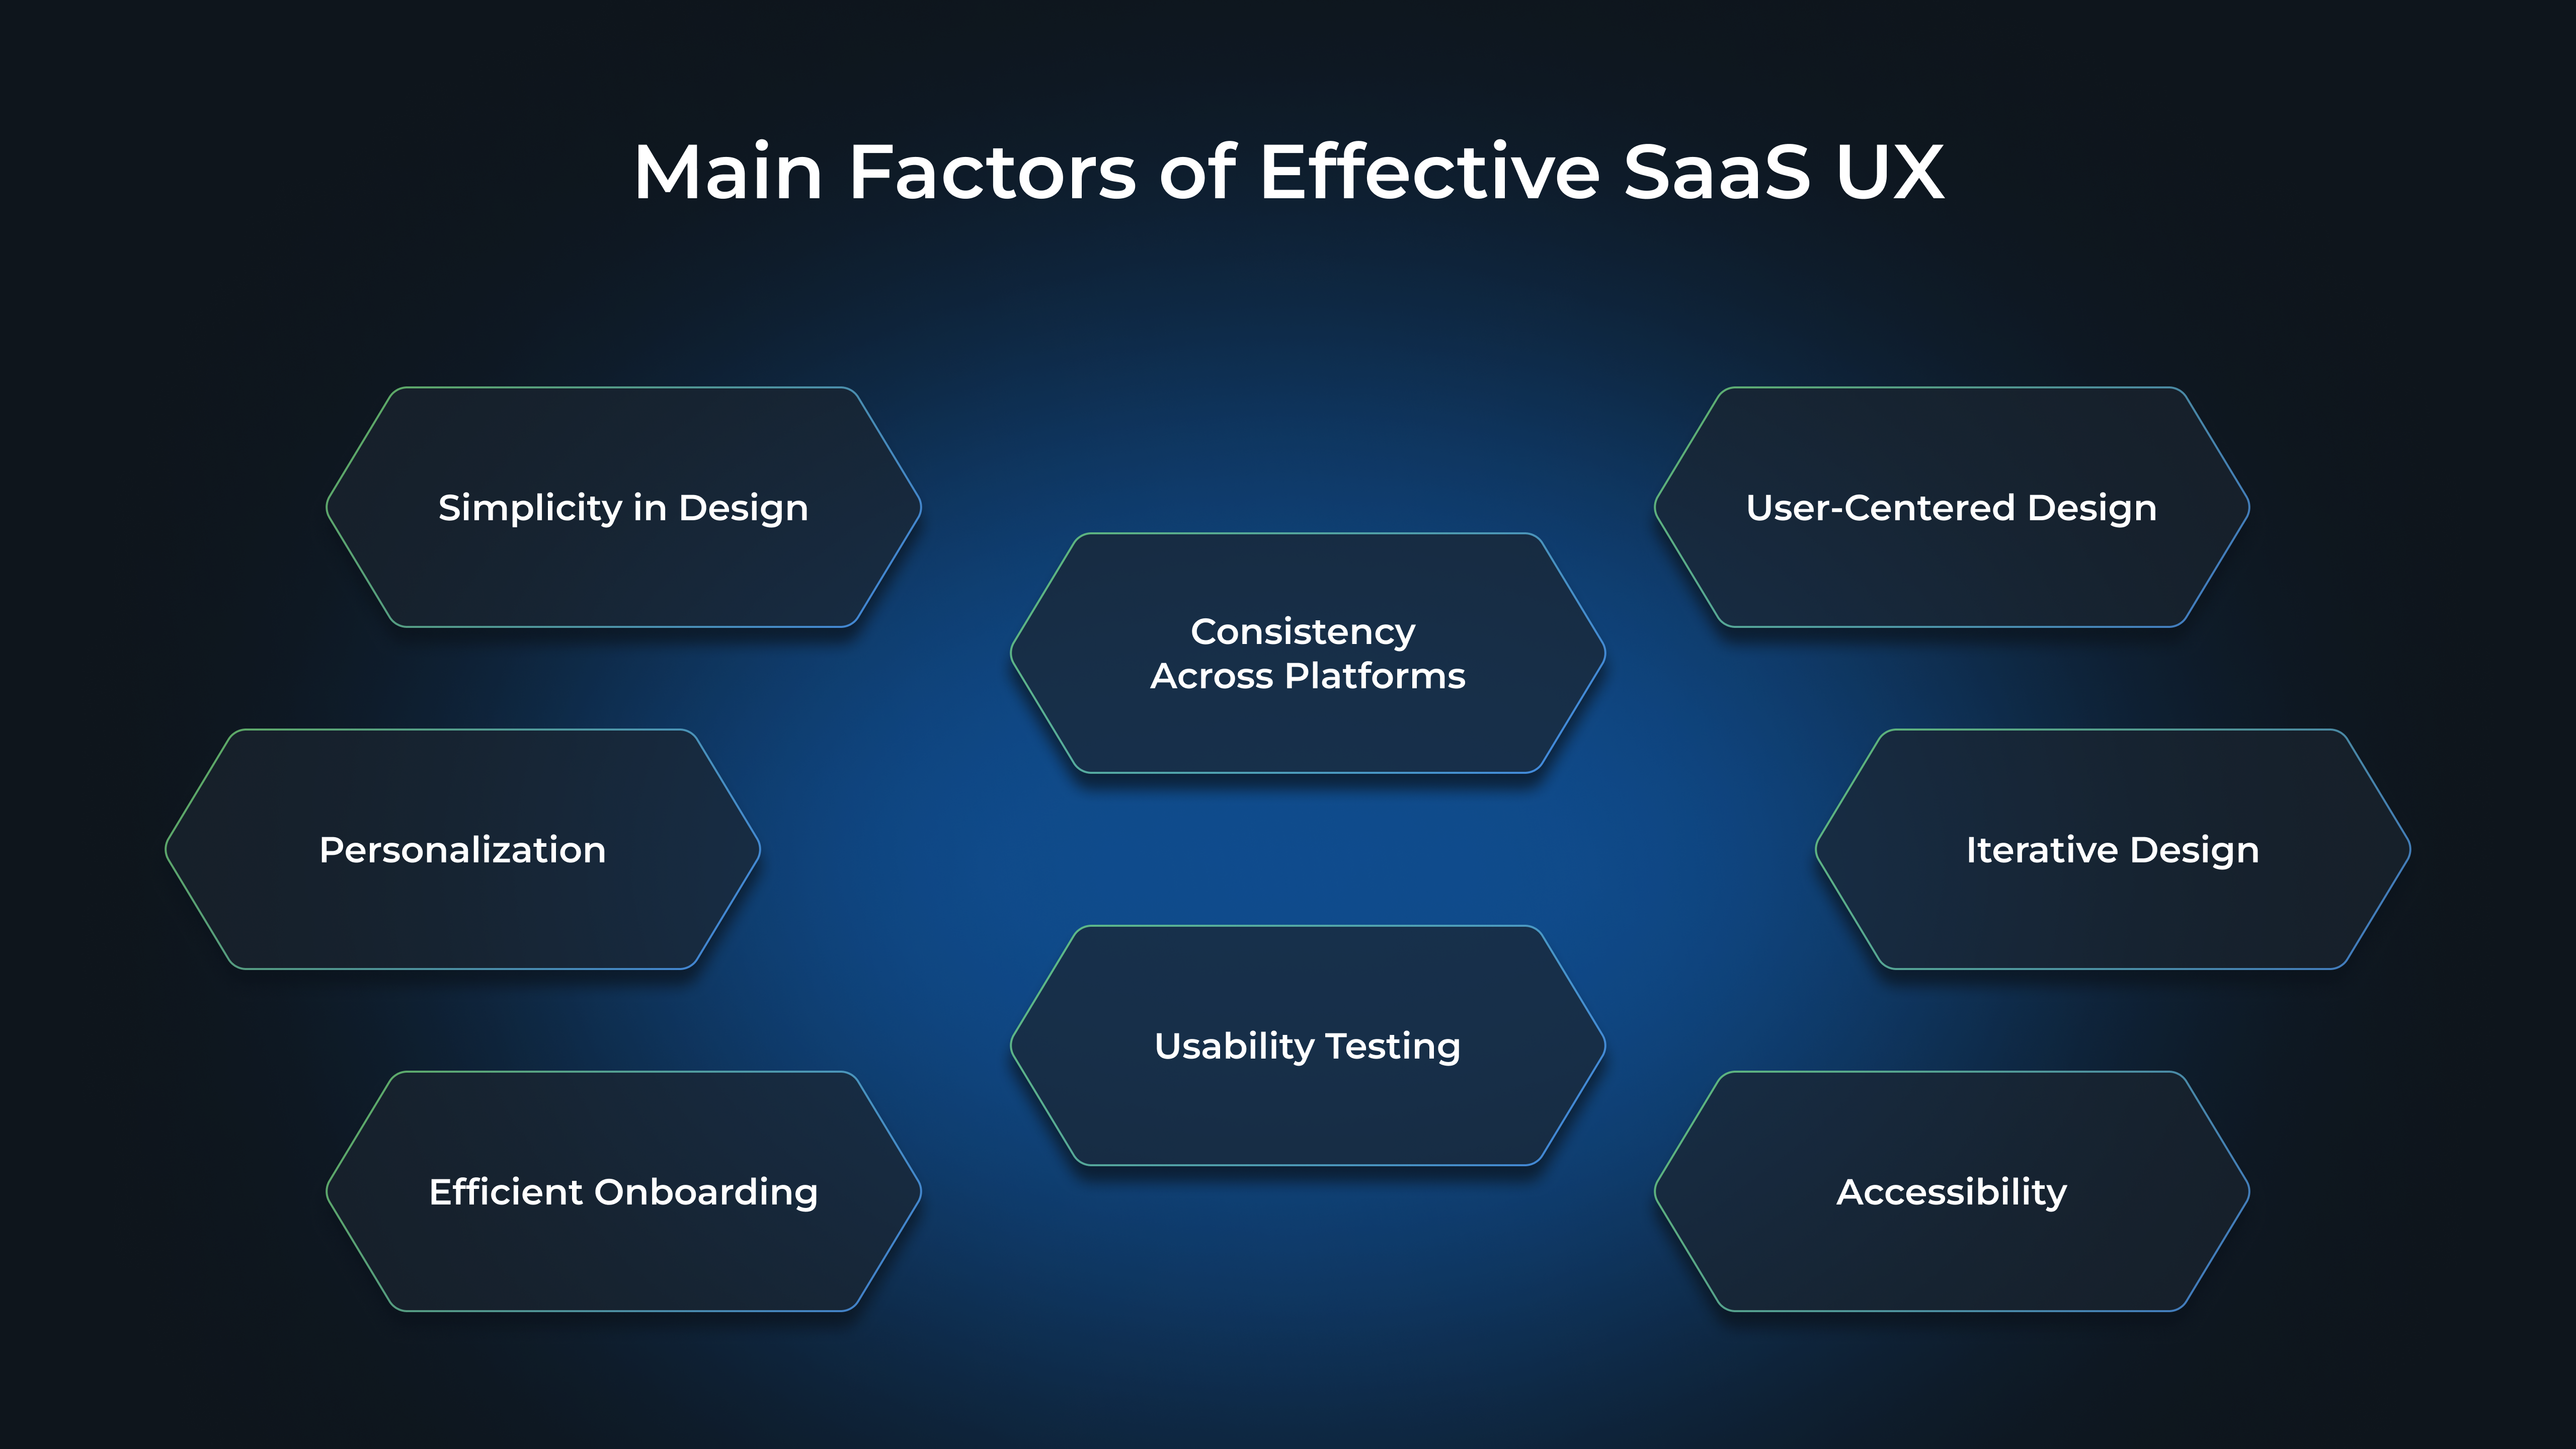 Main Factors of Effective SaaS UX: Simplicity in Design, Consistency Across Platforms, User-Centered Design, Personalization, Usability Testing, Iterative Design, Efficient Onboarding
Accessibility
